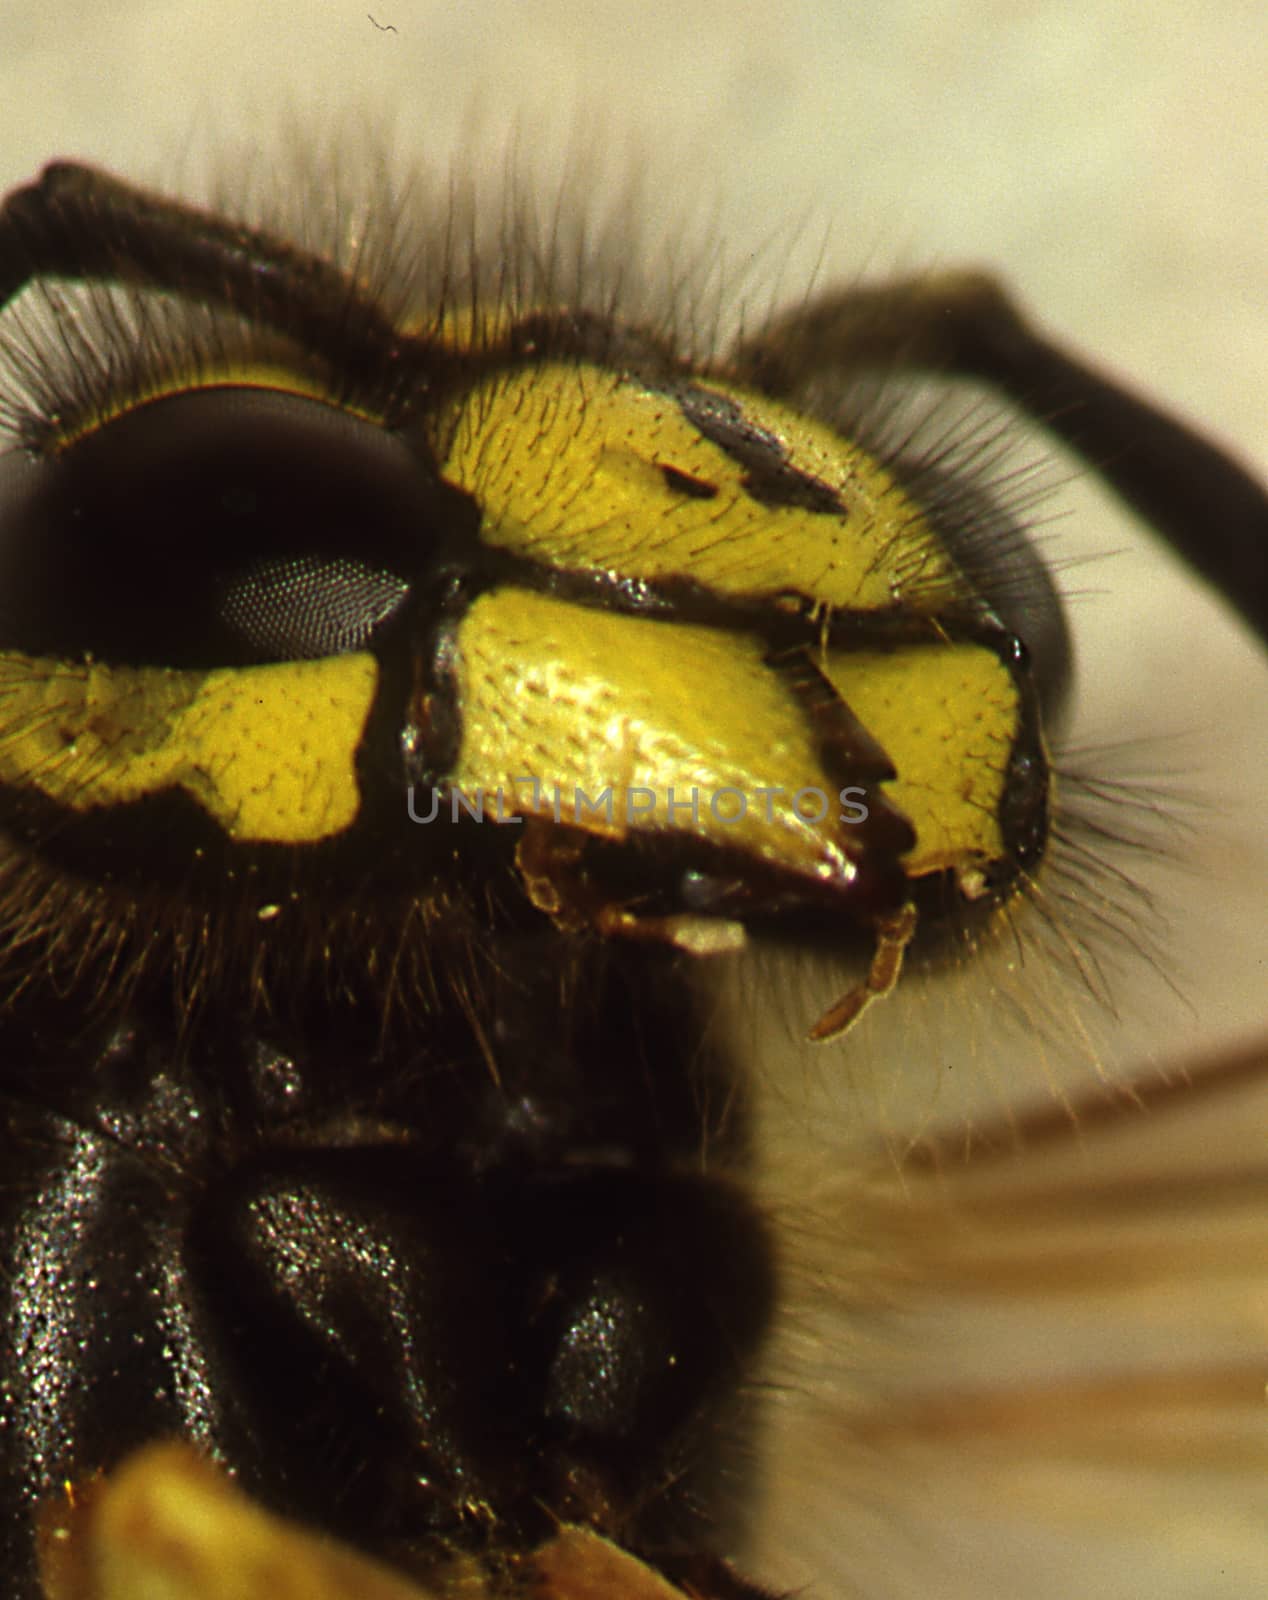 Wasp head and body with feelers and compound eyes by Dr-Lange